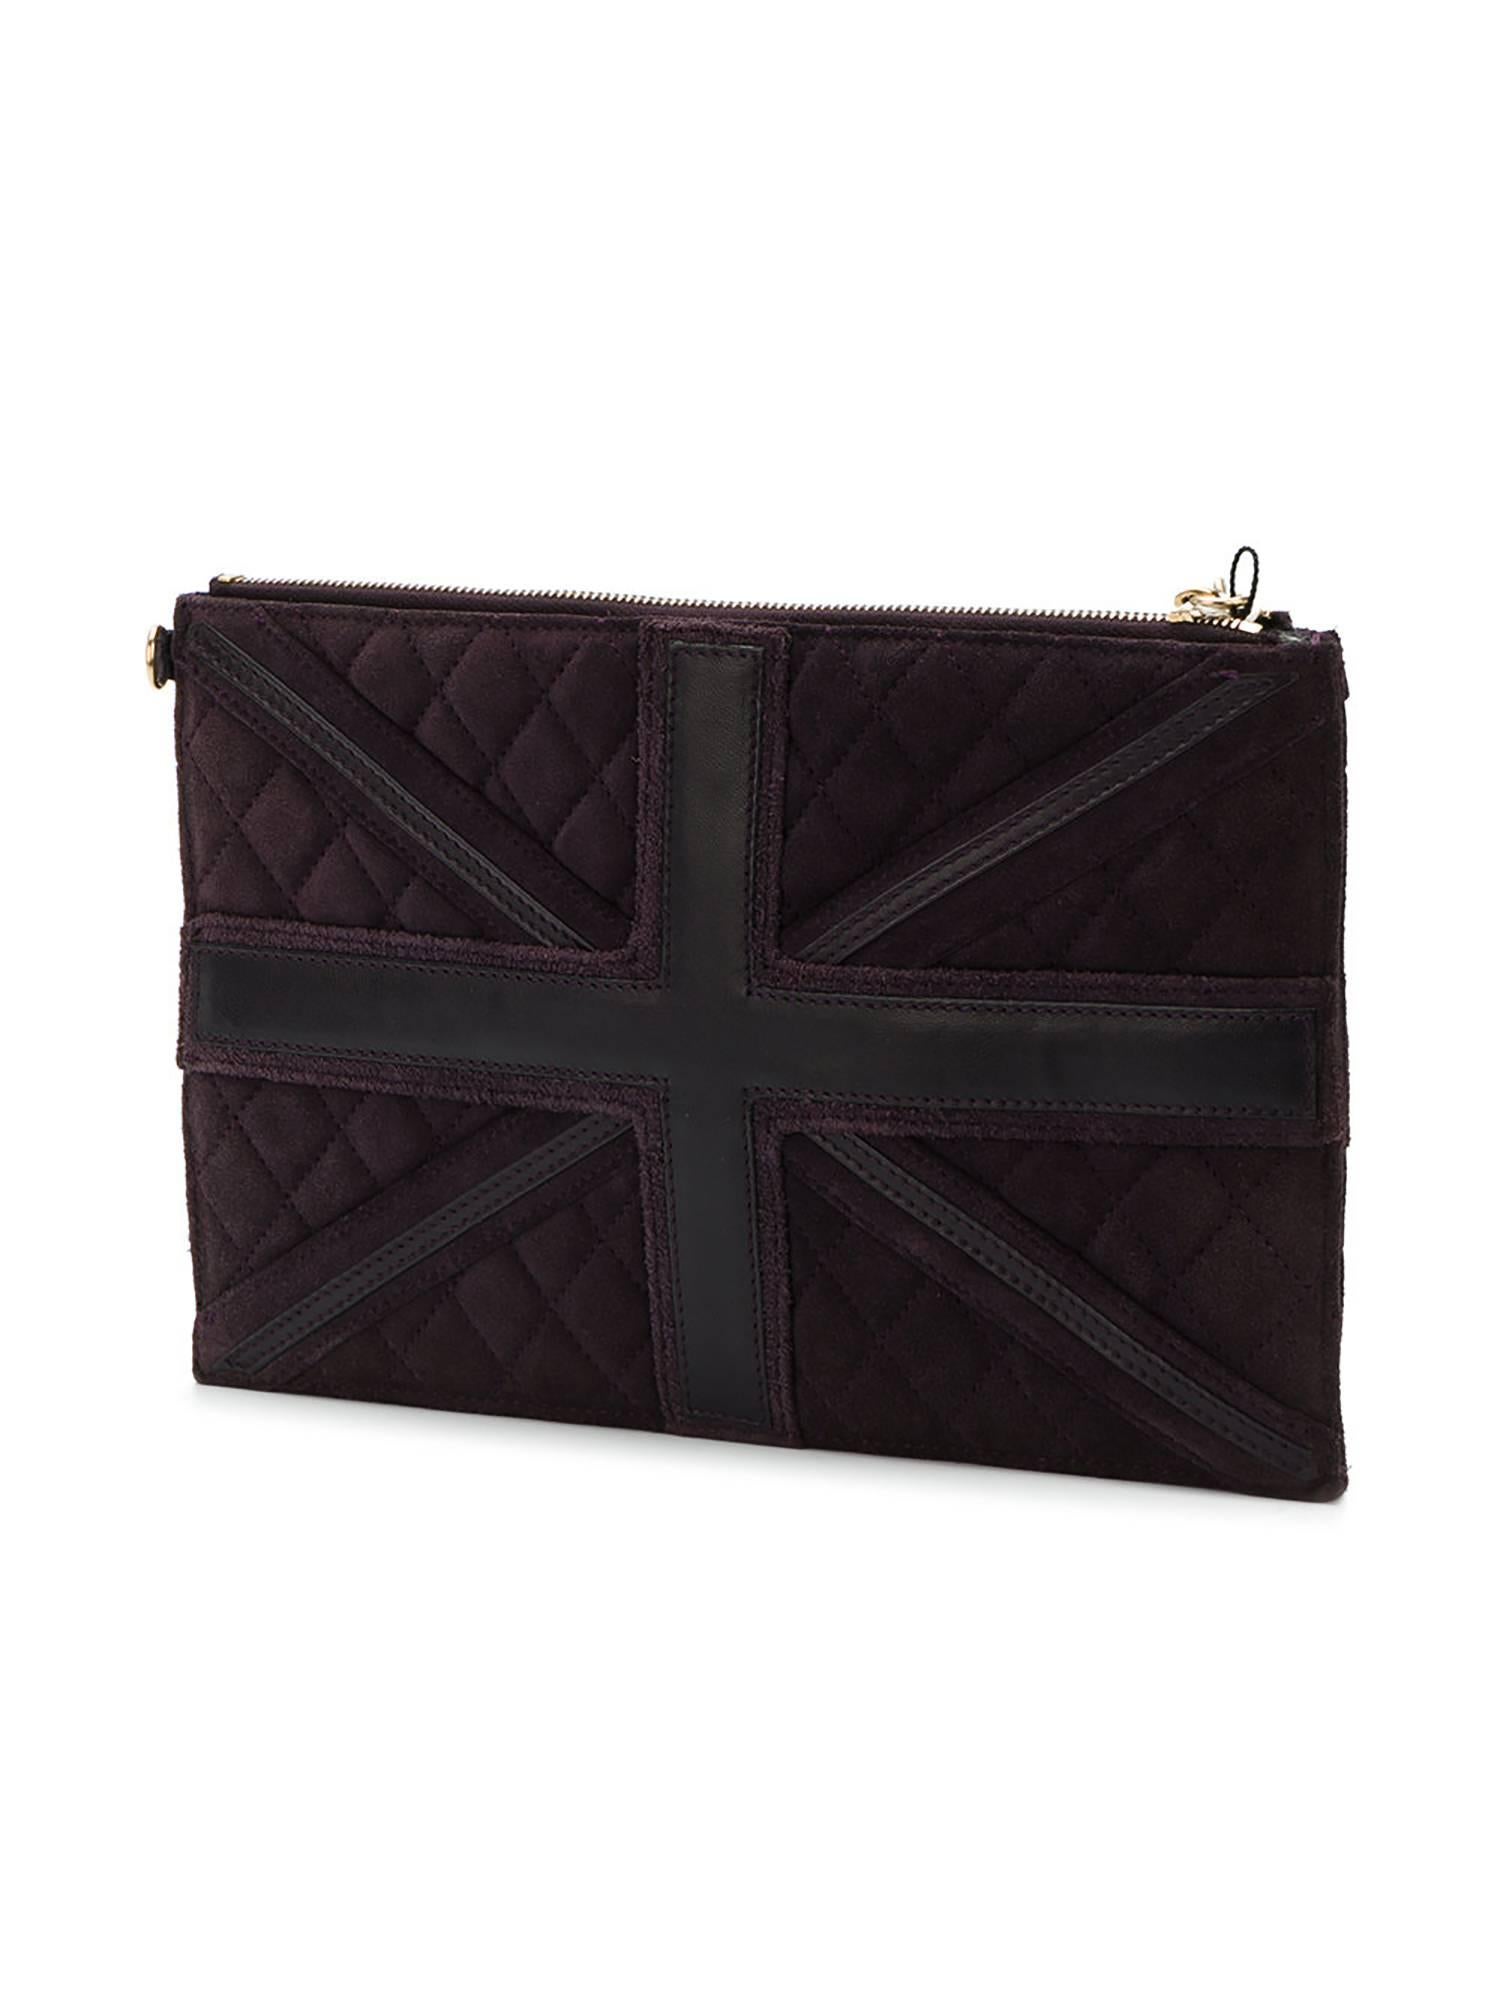 The Chanel Purple Suede Union Jack Zippered Wristlet is the perfect wear over your shoulder or as a wristlet. It is featured in purple suede with tonal leather piping details. In gold tones, the label's iconic monogram adorns the front, alongside a